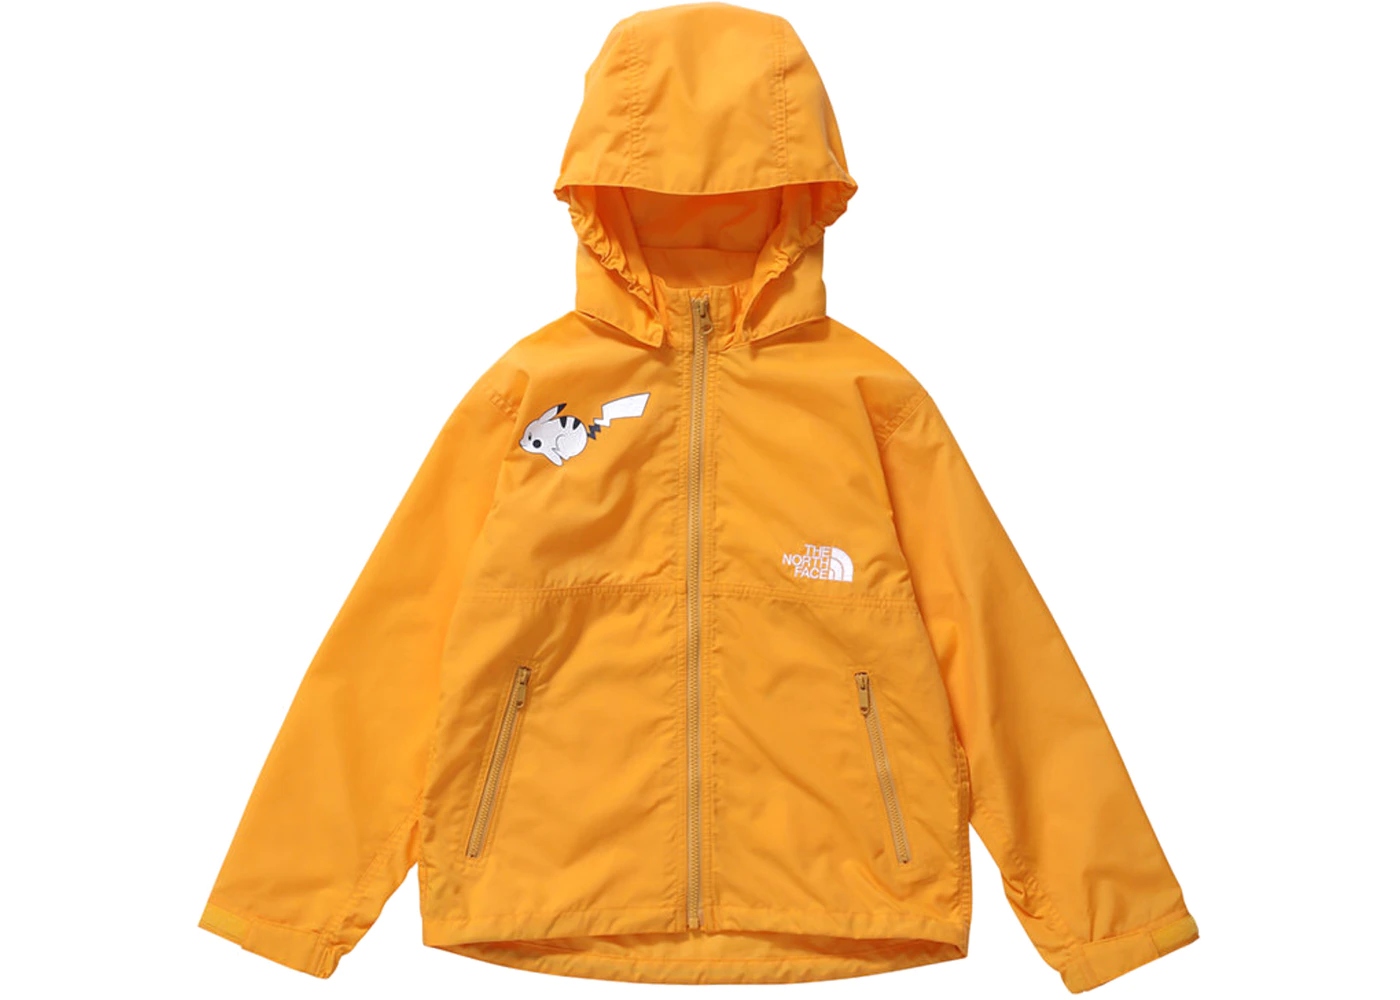 The North Face X Pikachu jacket